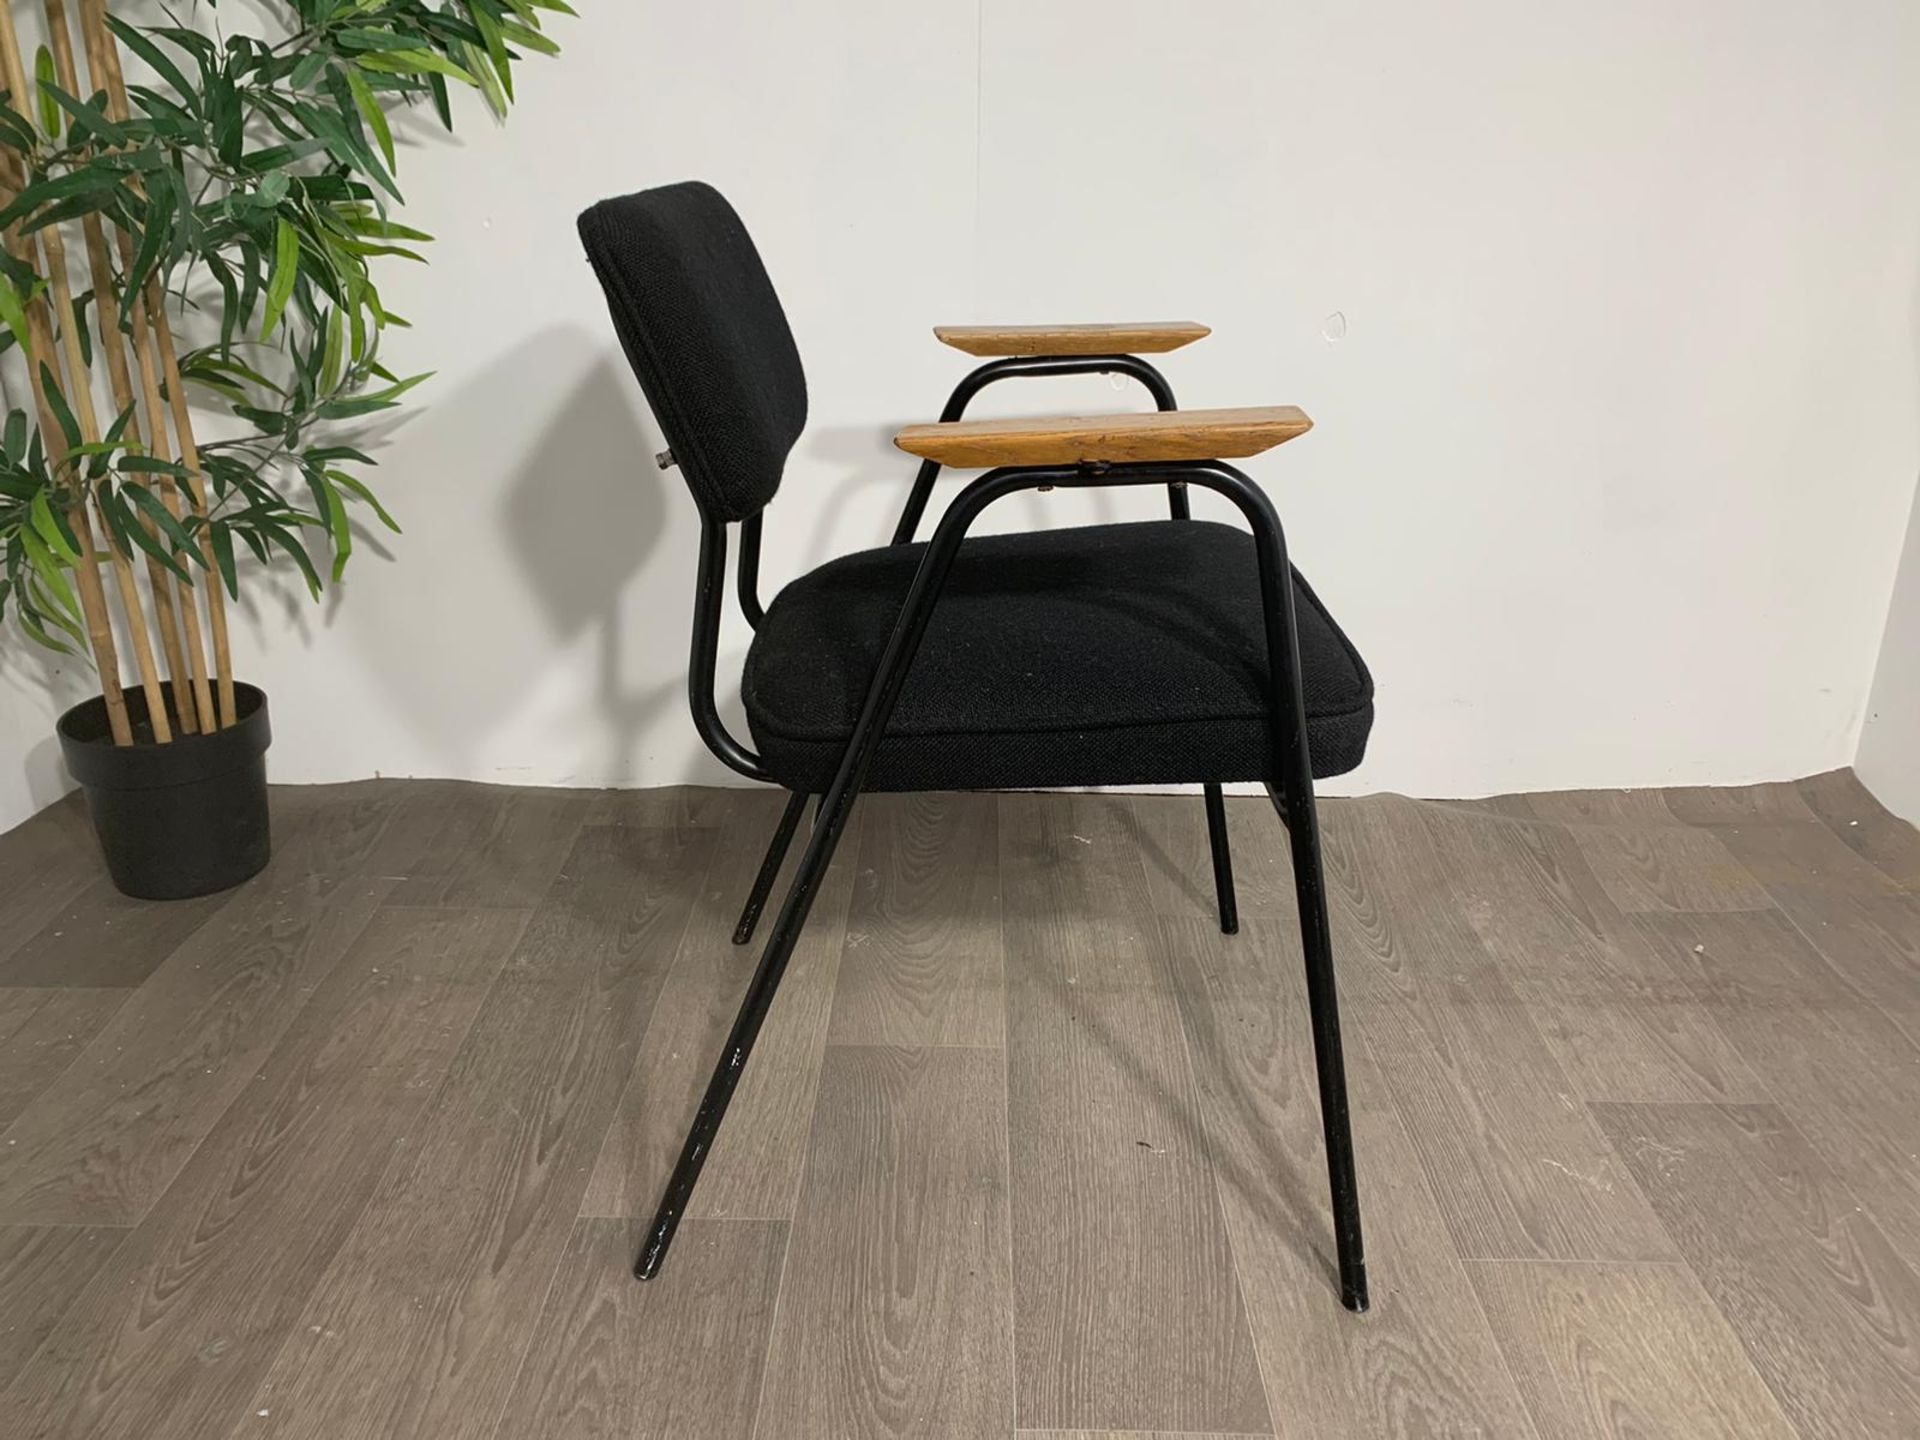 Black Commercial Grade Chair with Wooden Arm Rest - Image 3 of 6